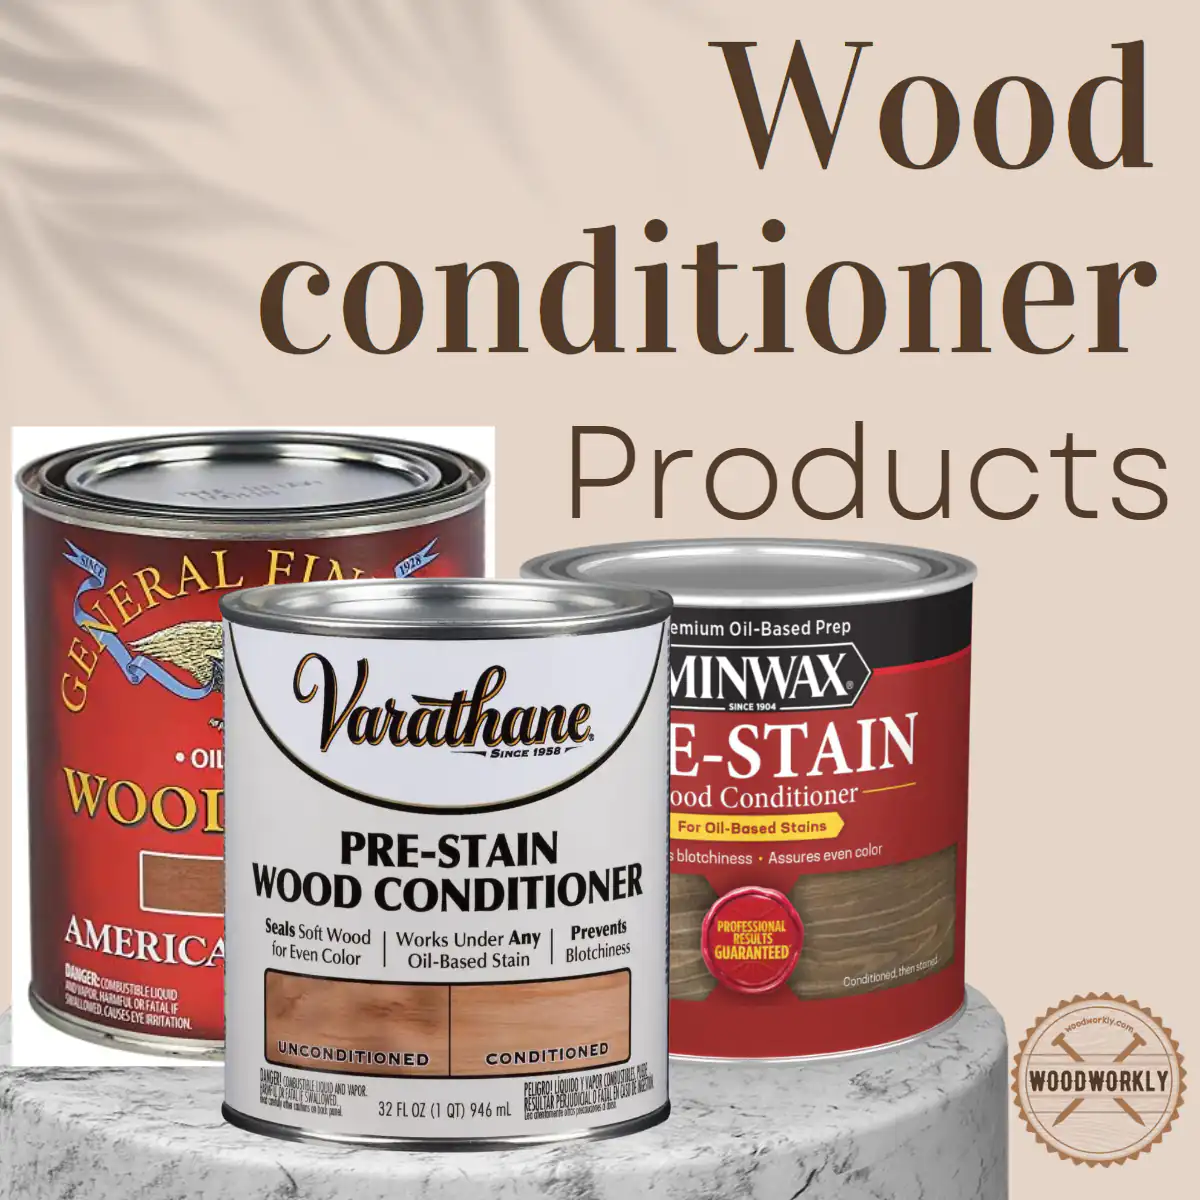 Wood conditioner products